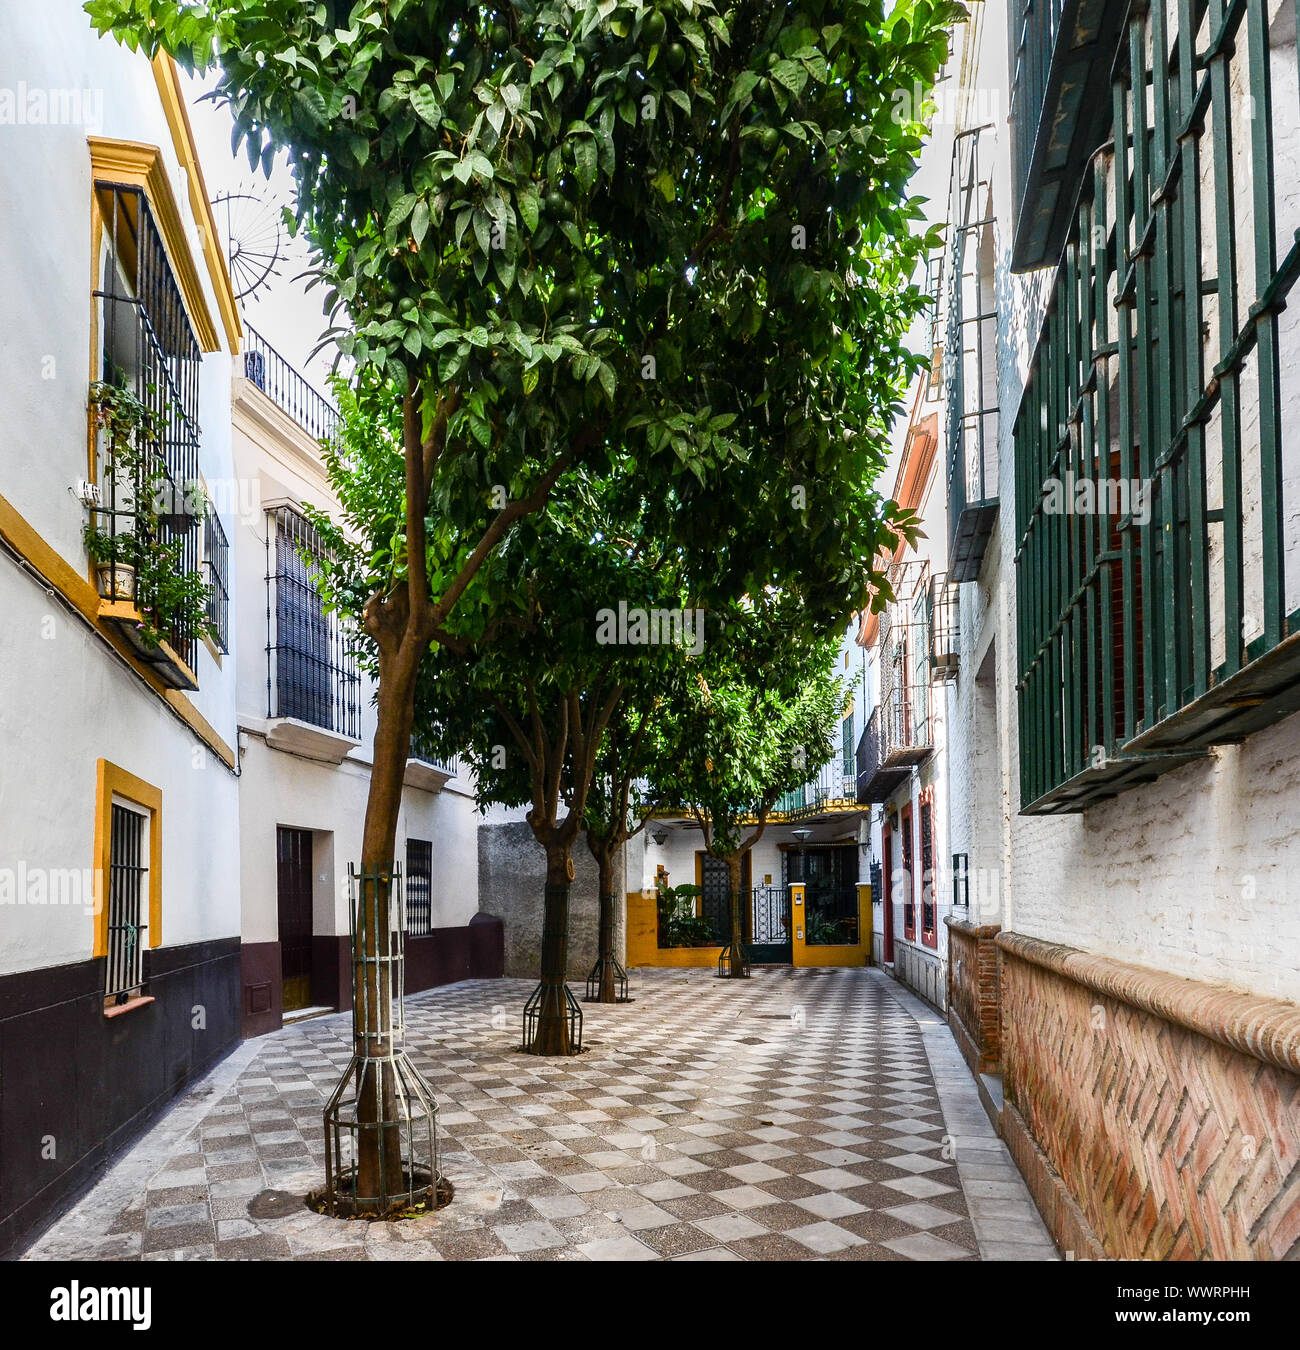 Quiet cul de sac in the famous neighborhood of Holy Cross, also known as Barrio de Santa Cruz, Seville, Andalusia, Spain, a former Jewish Quarter - wi Stock Photo